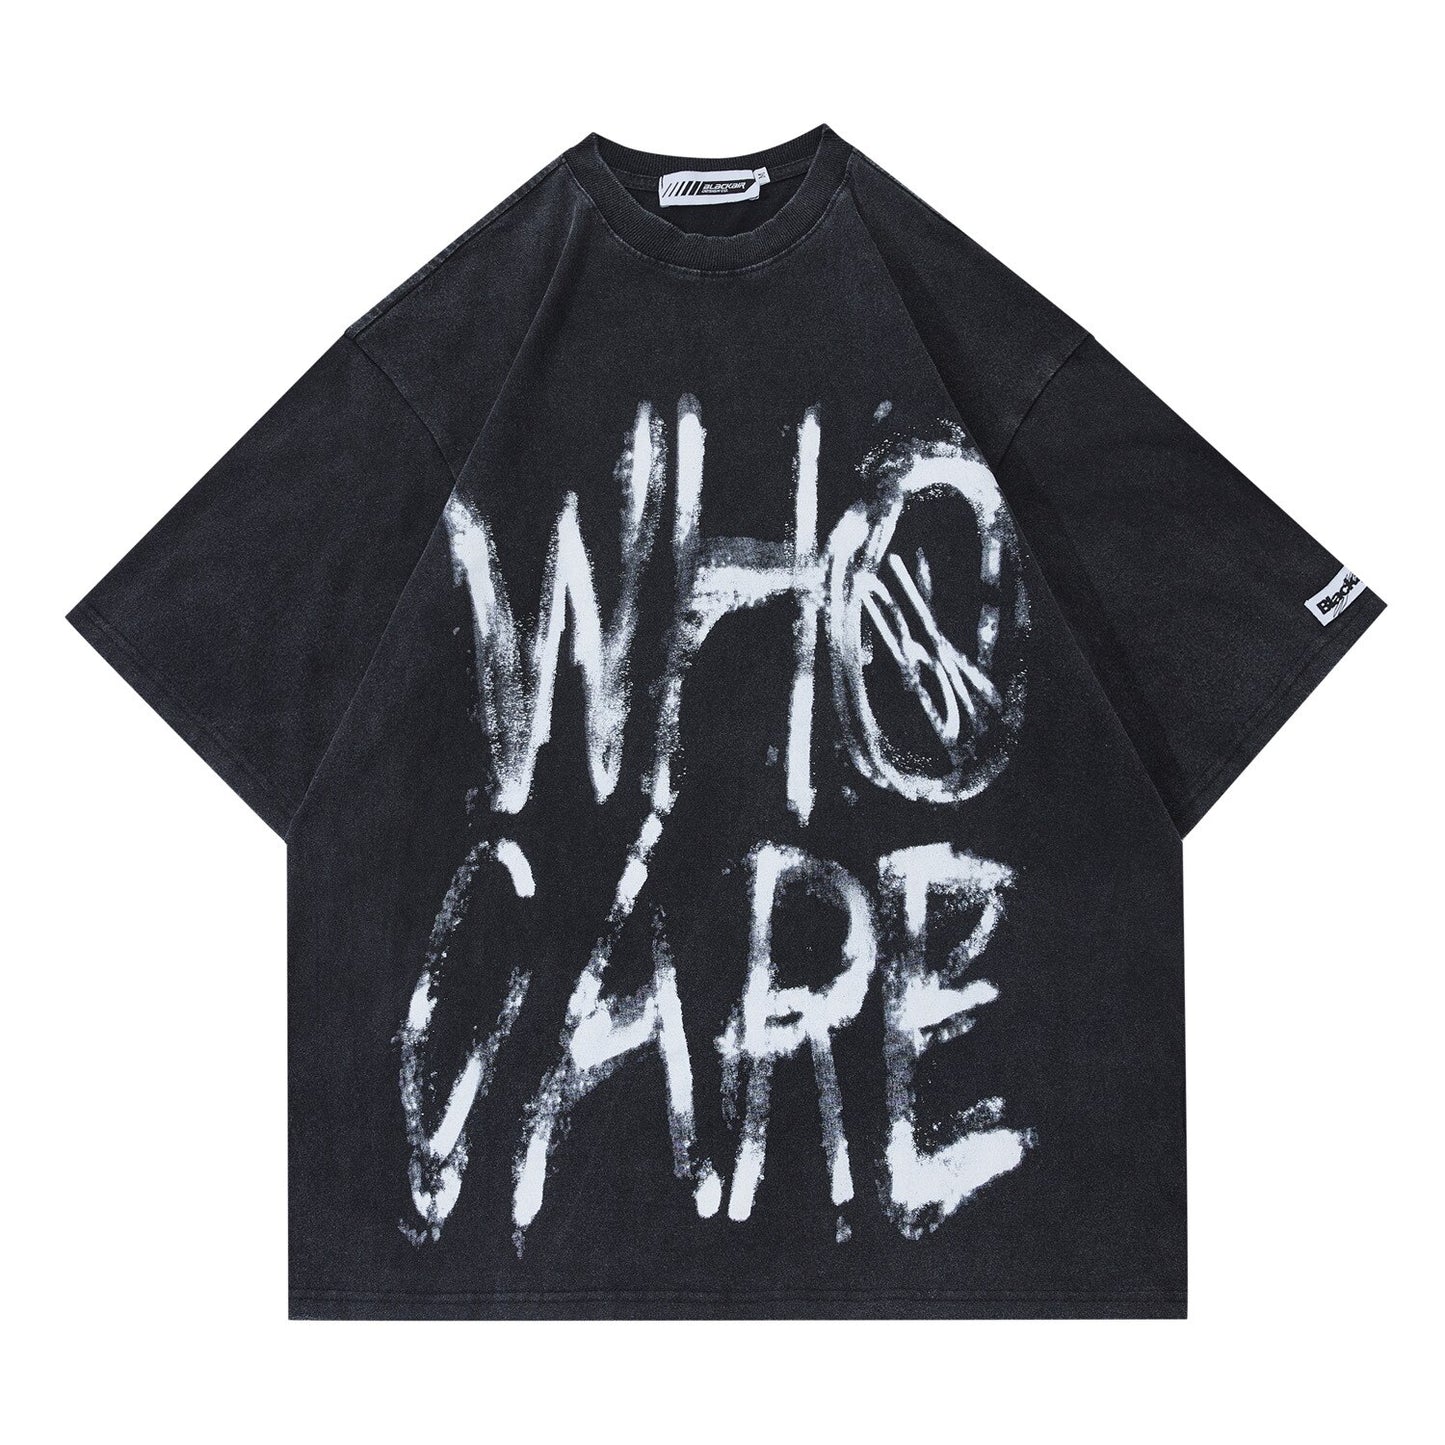 BLACKAIR Who Care Hand-painted Printed Letters Washed Short-sleeved T-shirts